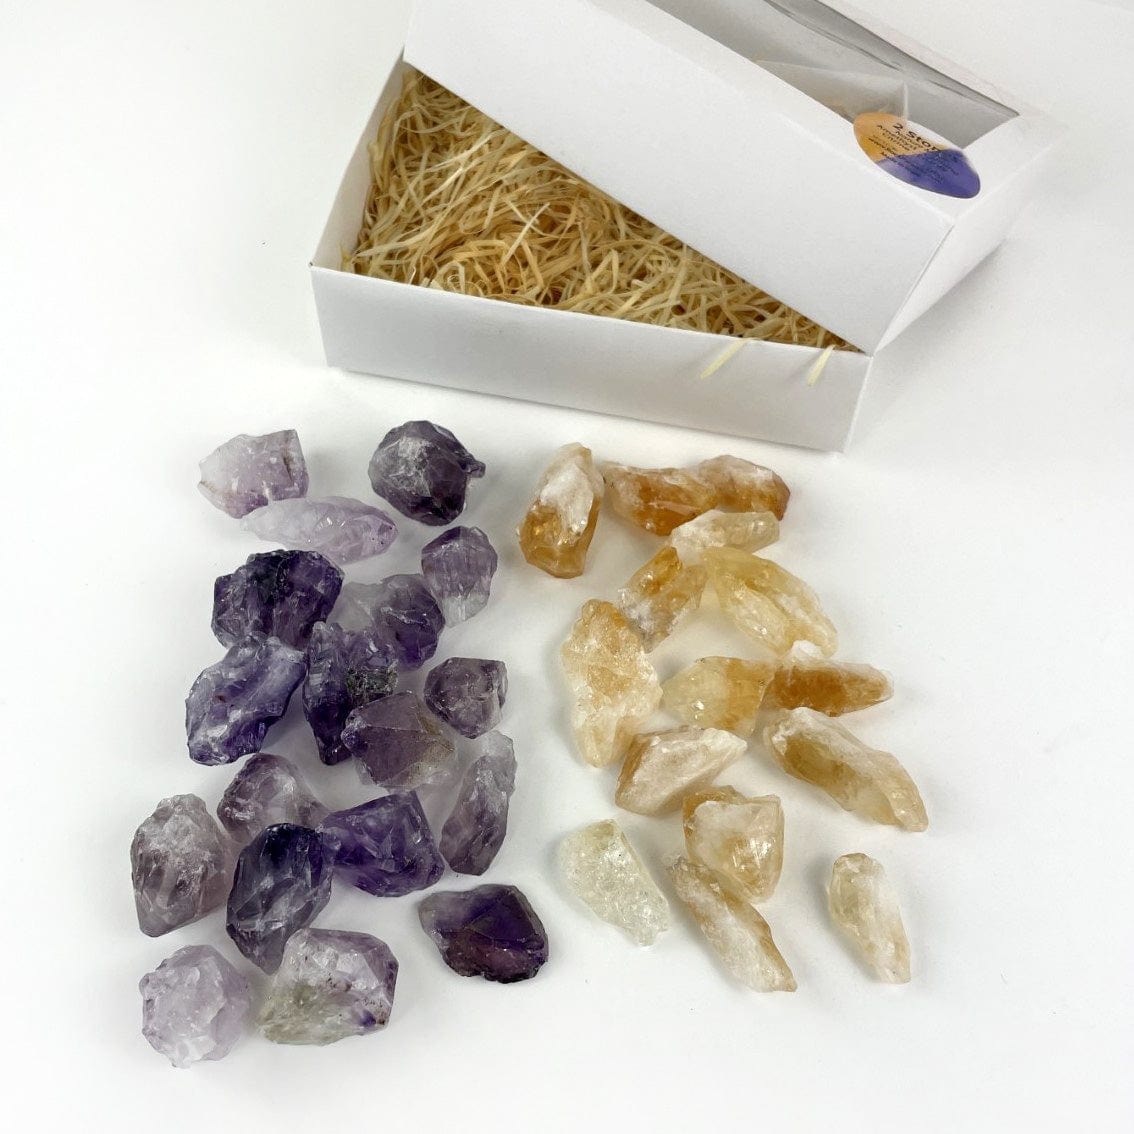 Amethyst and Citrine (Golden Amethyst)  Pieces spread out on a table